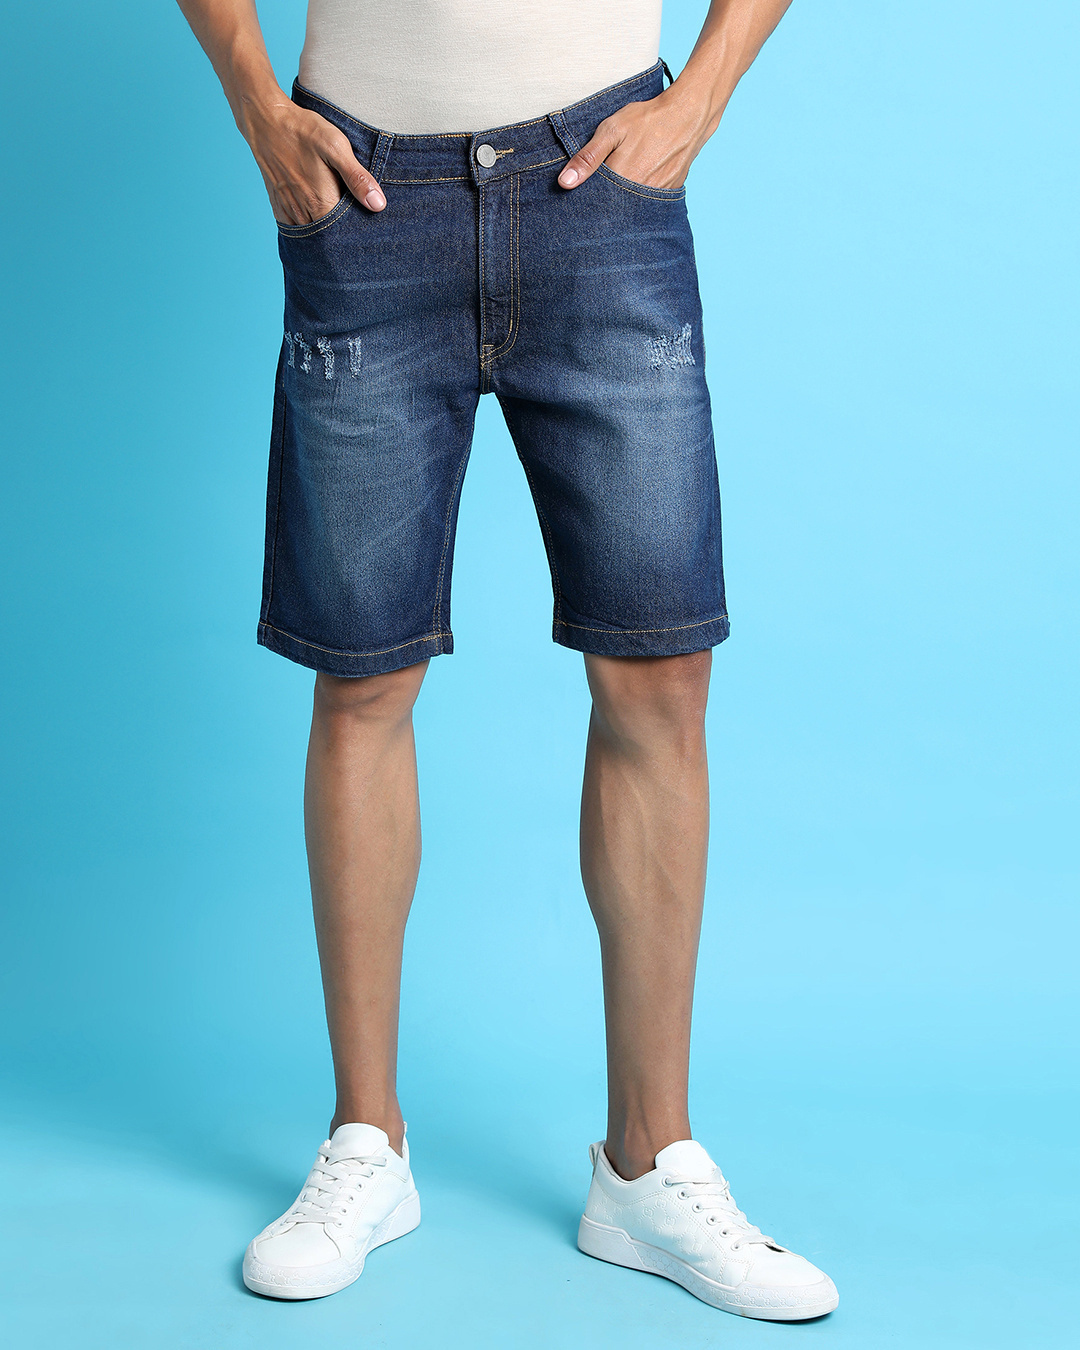 Cofouen Men's Ripped Short Jeans Casual Slim Fit India | Ubuy